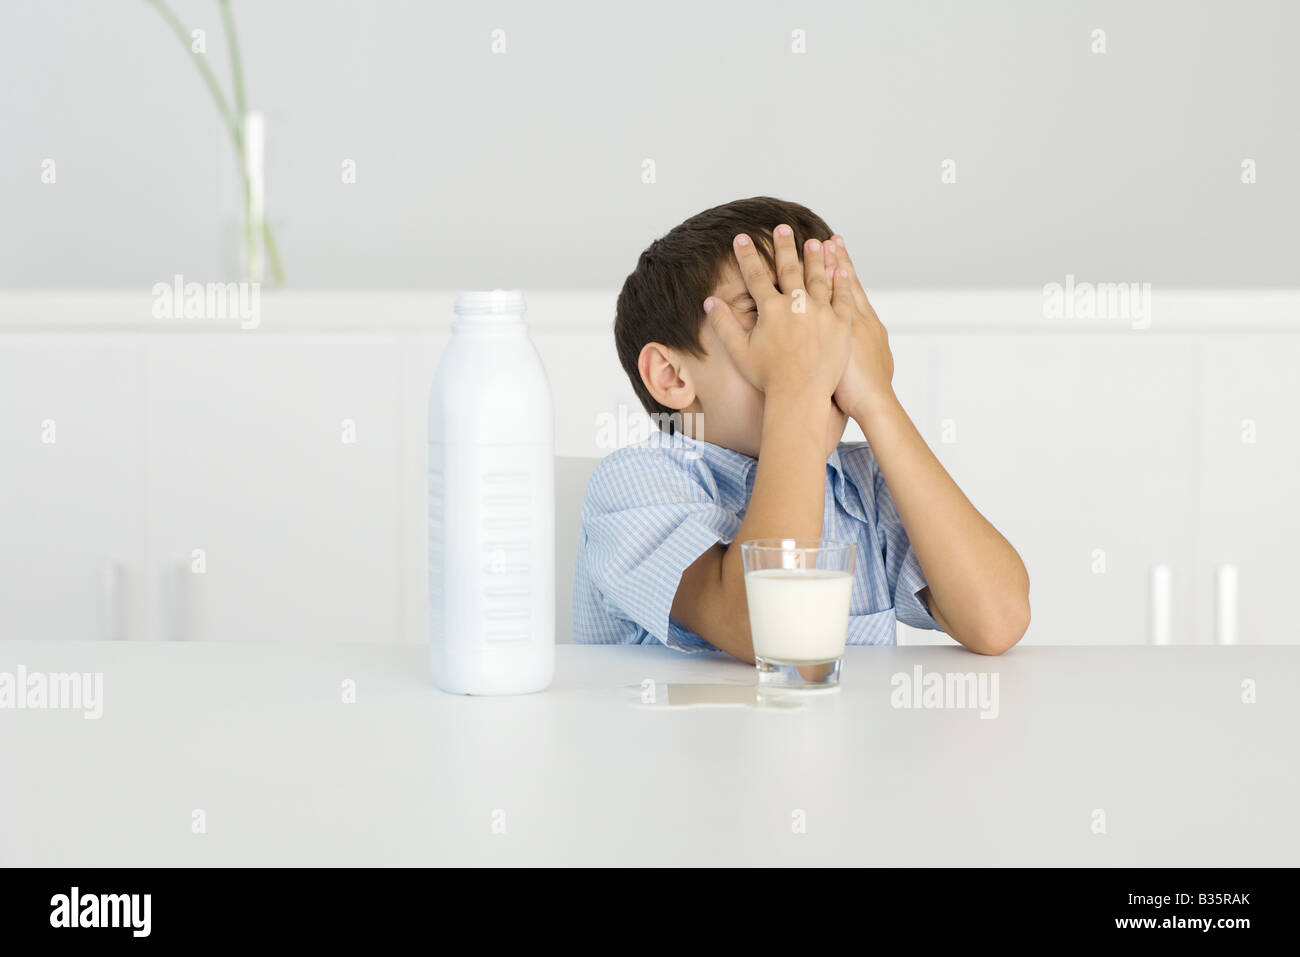 Boy with spilled milk, covering face with hands Stock Photo